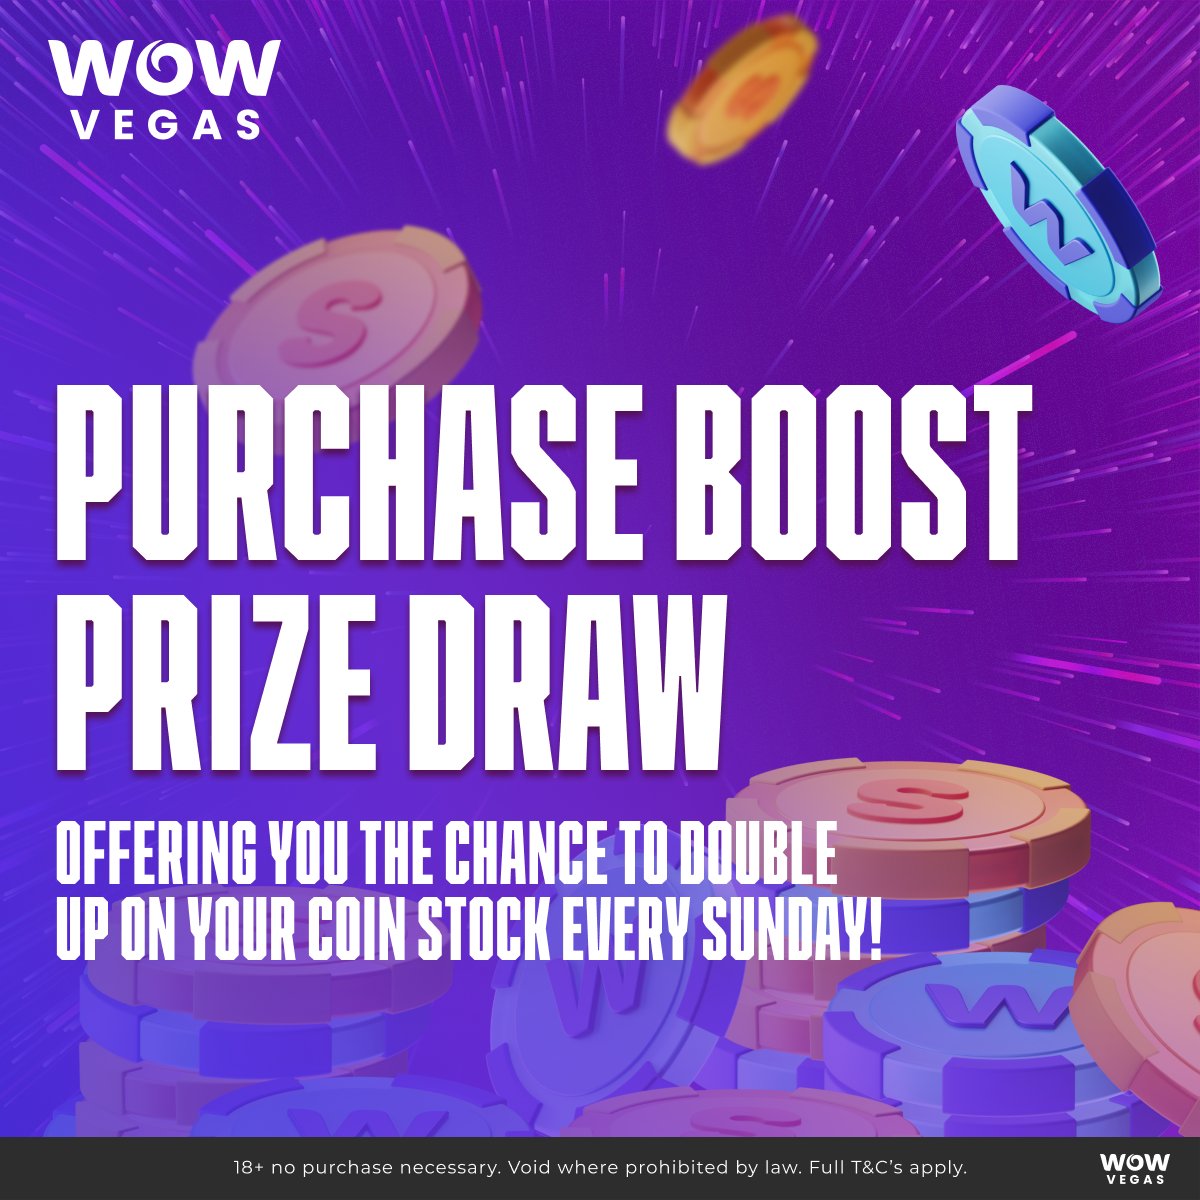 Sunday means Purchase Boost! ⏰ Every Sunday from 6AM PST to Monday 6AM PST, purchasing eligible Coin Packages enters you into our Purchase Boost Prize Draw! 💰 We'll randomly select 200 customers to receive an additional pack of the same value for free!